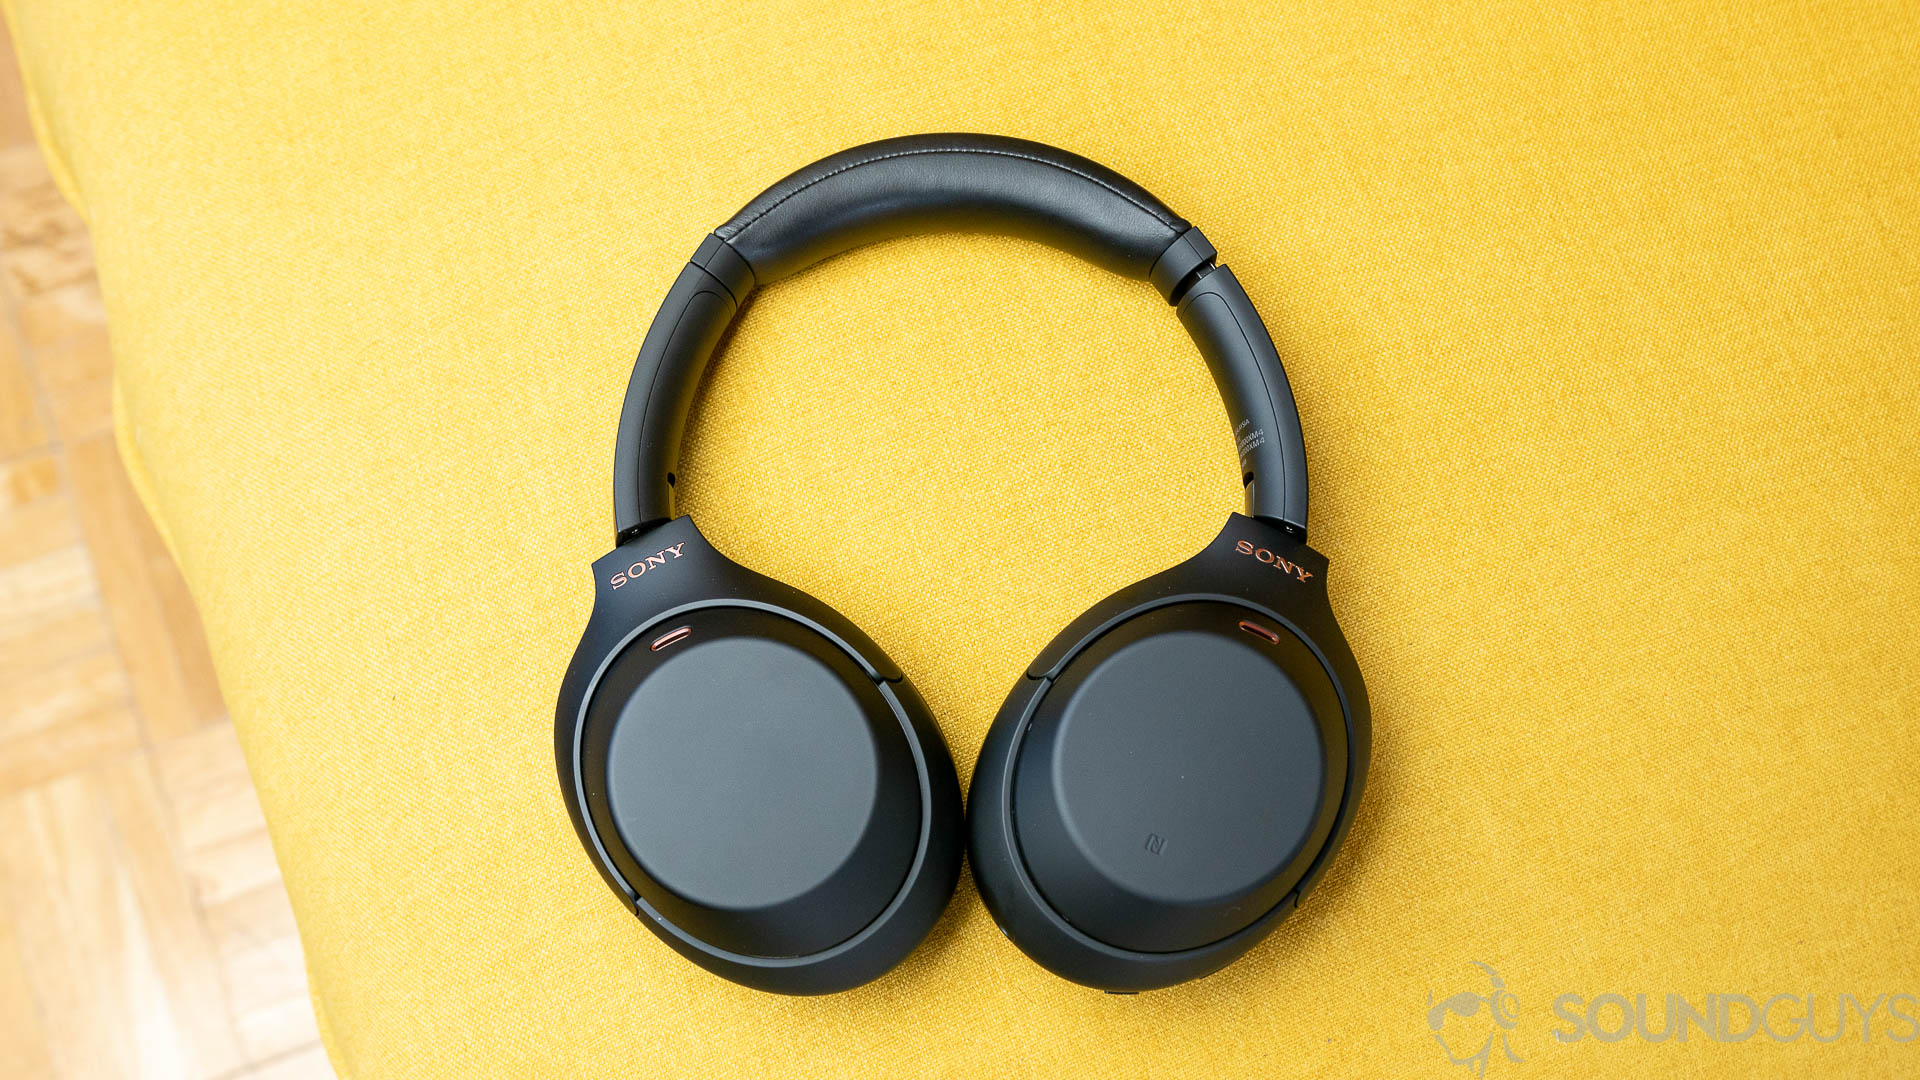 The Sony WH-1000XM4 noise cancelling headphones full yellow backdrop.